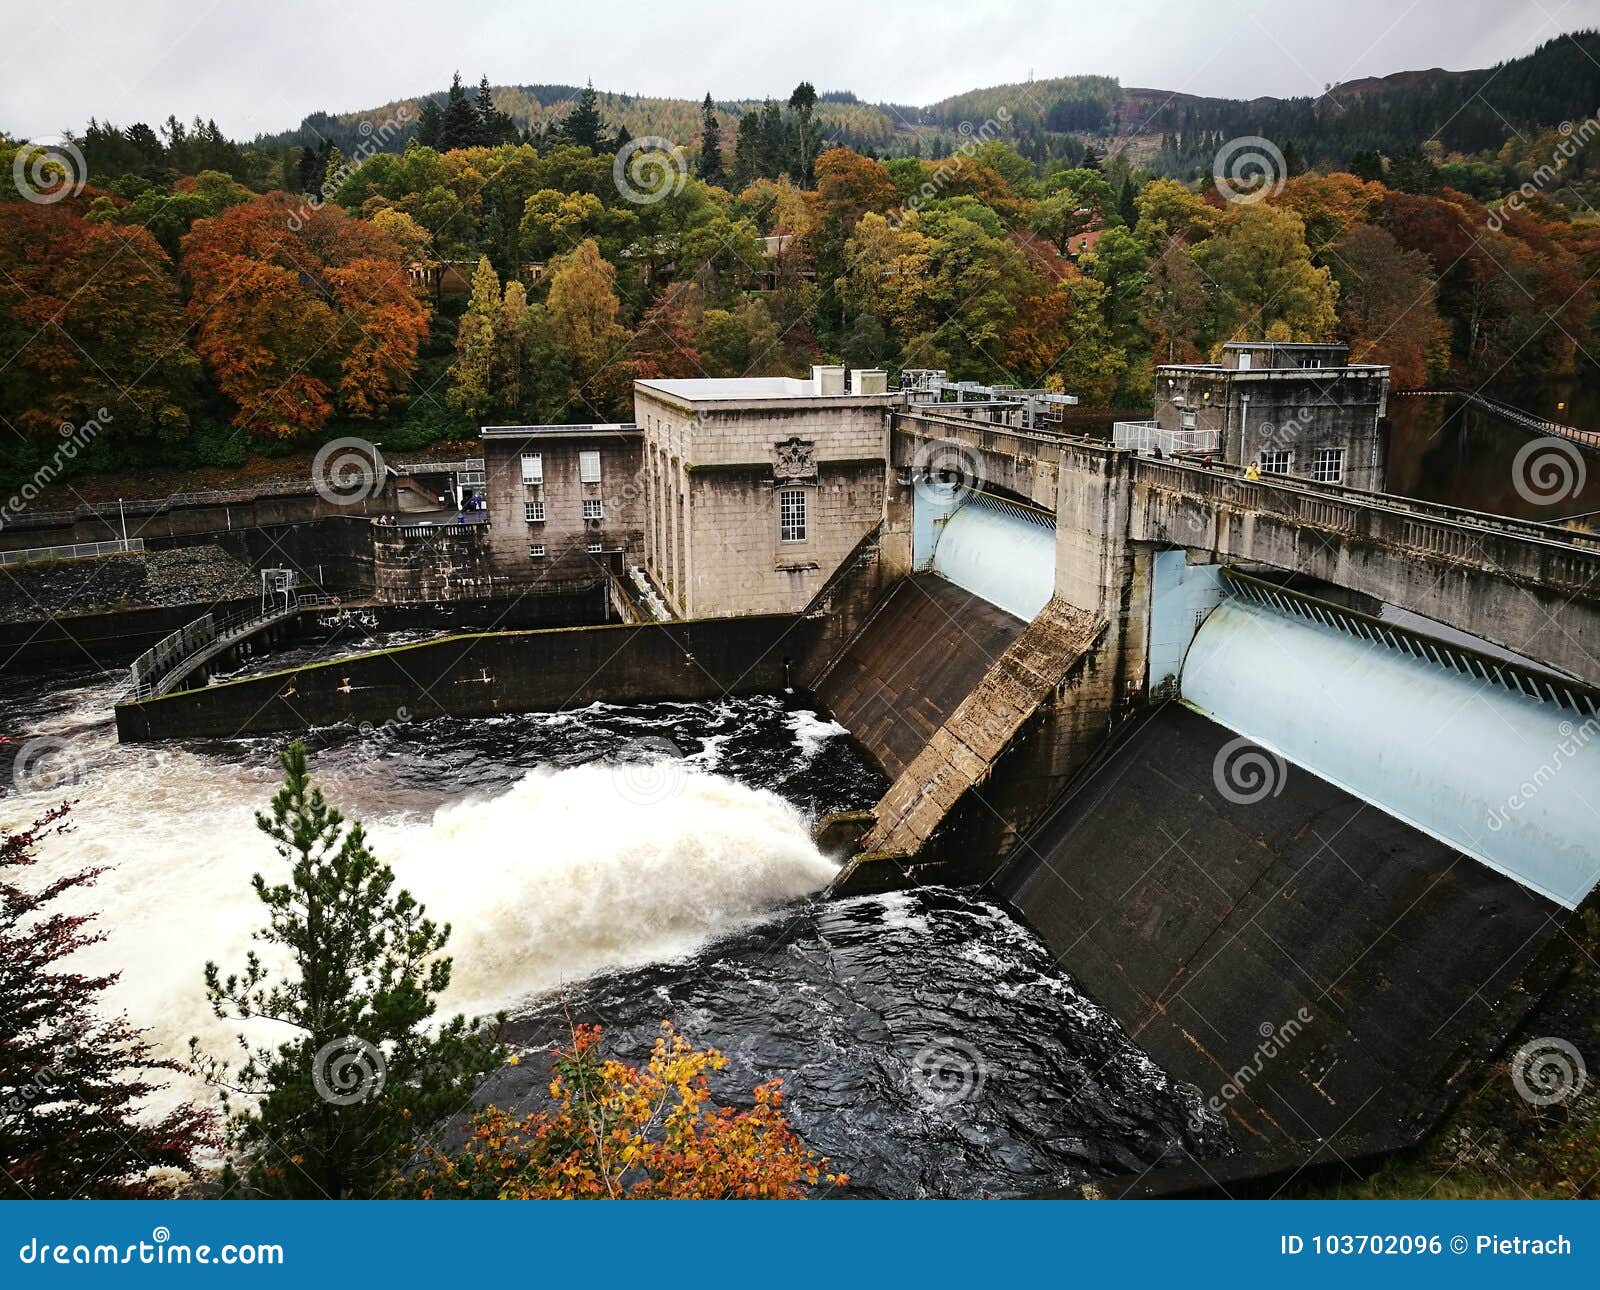 pitlochry fish ladder and dam